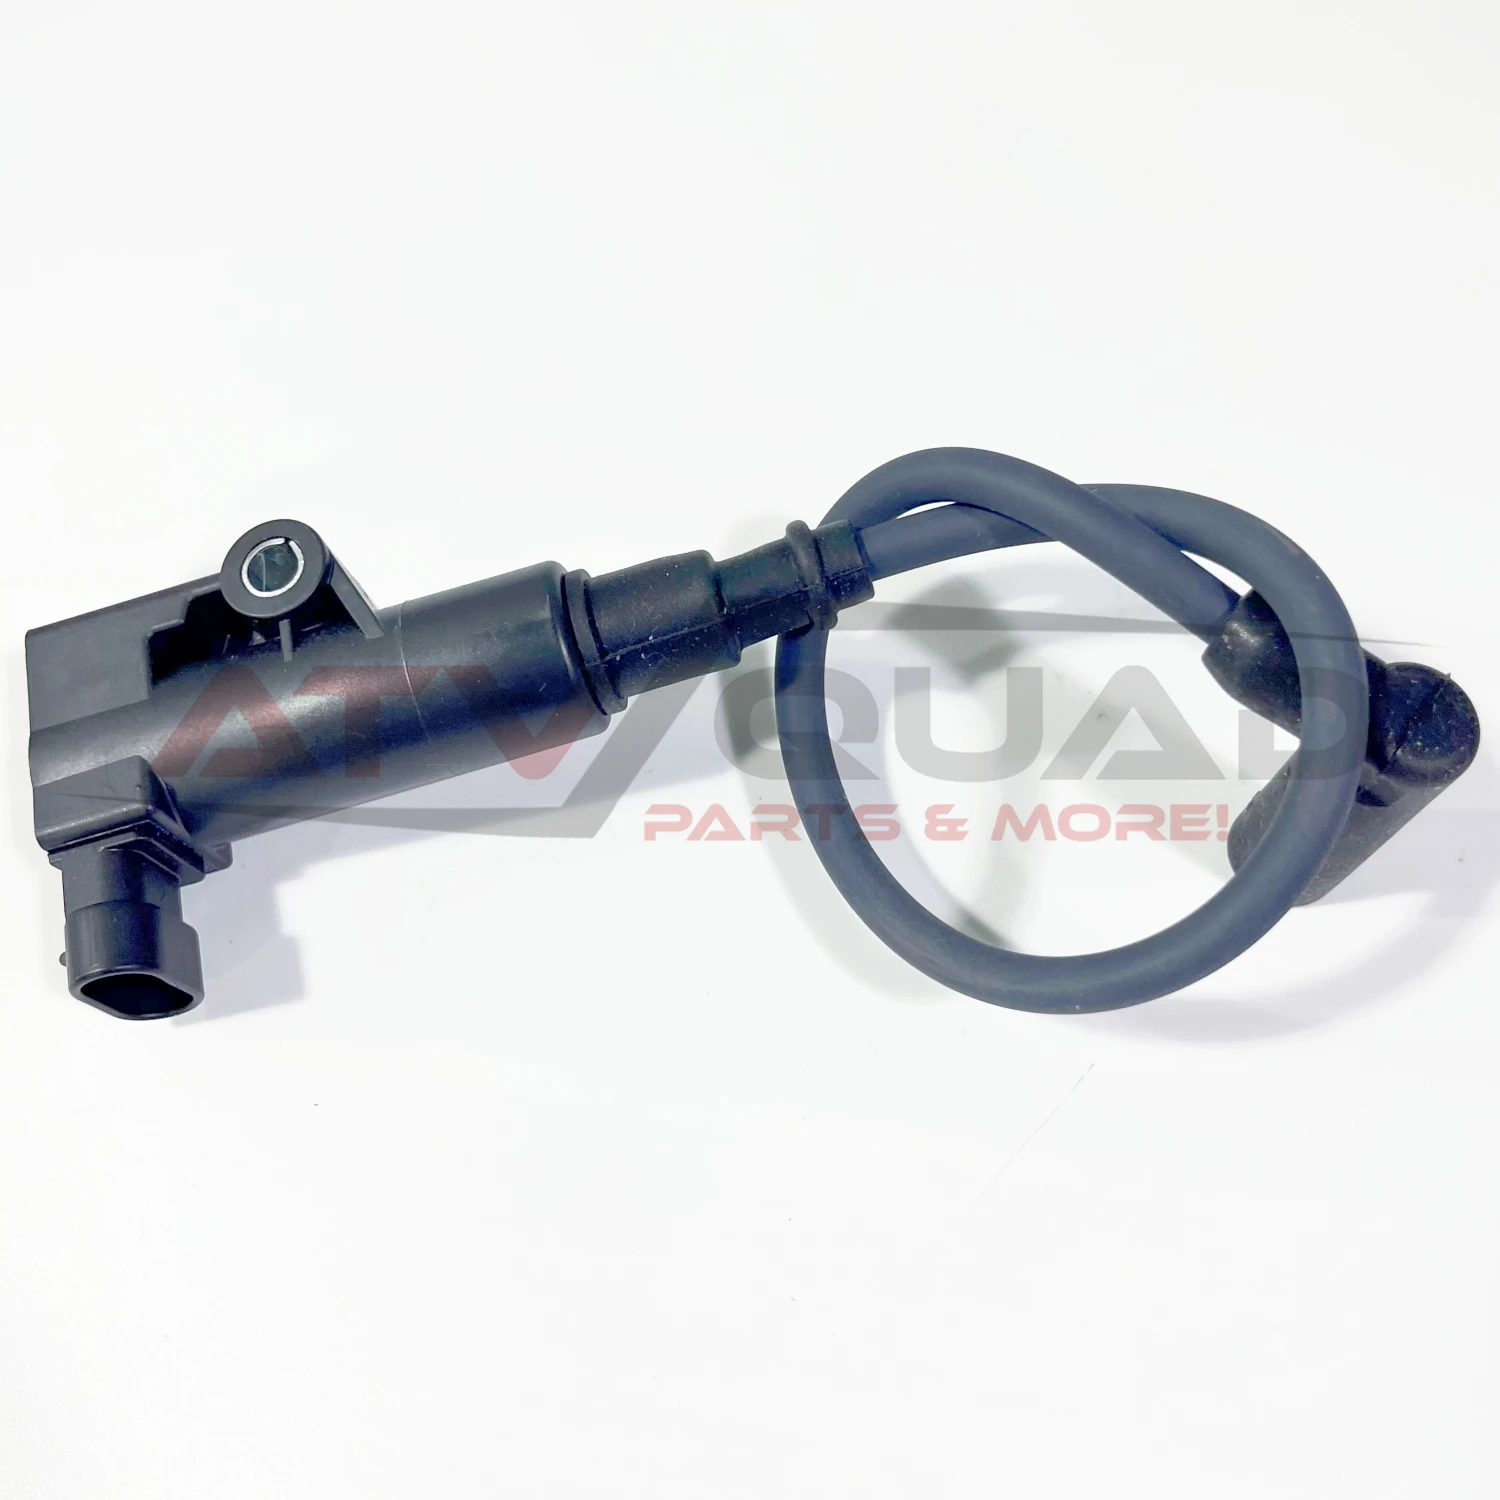 Ignition Coil and Wire for Rural King RK Performance 250 450 550 33100-116-0000 33120-113E-0000 BDW-IN-103